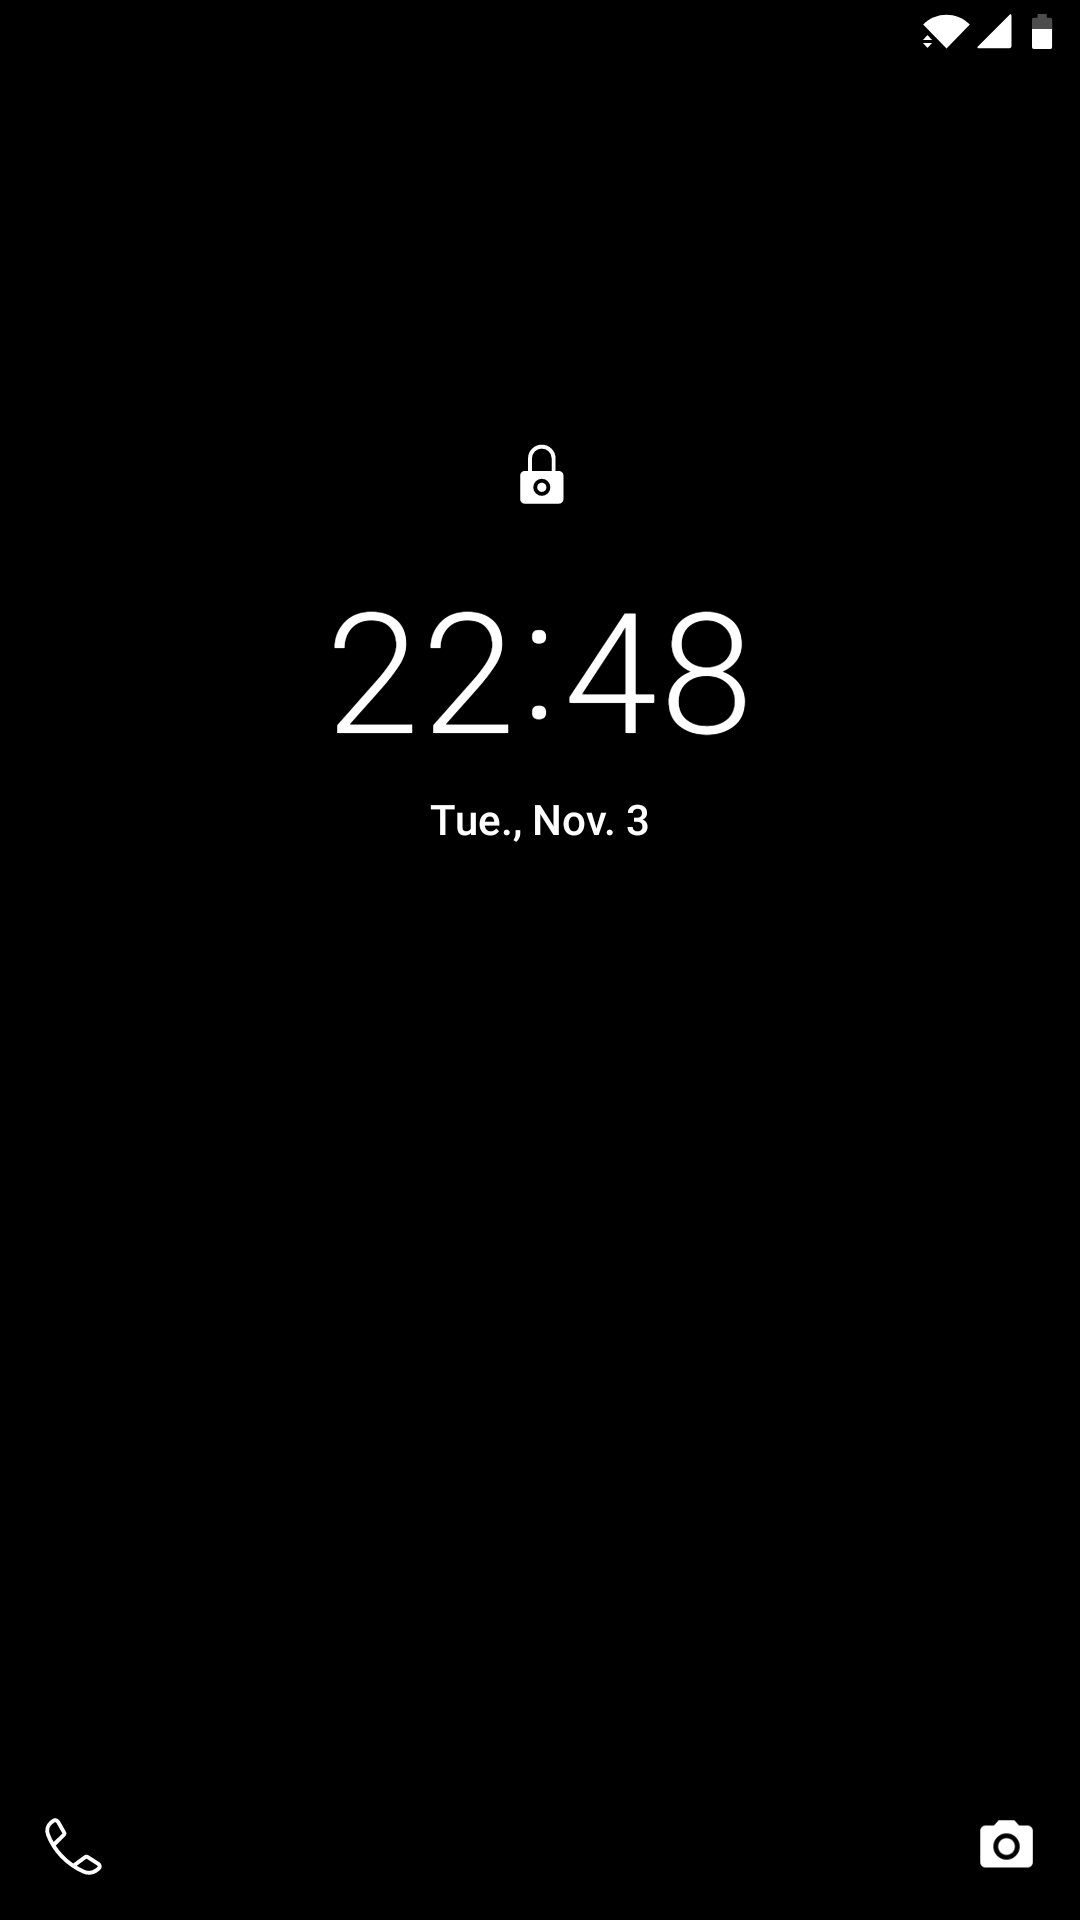 Lock screen on my Android smartphone, showing the current date and time